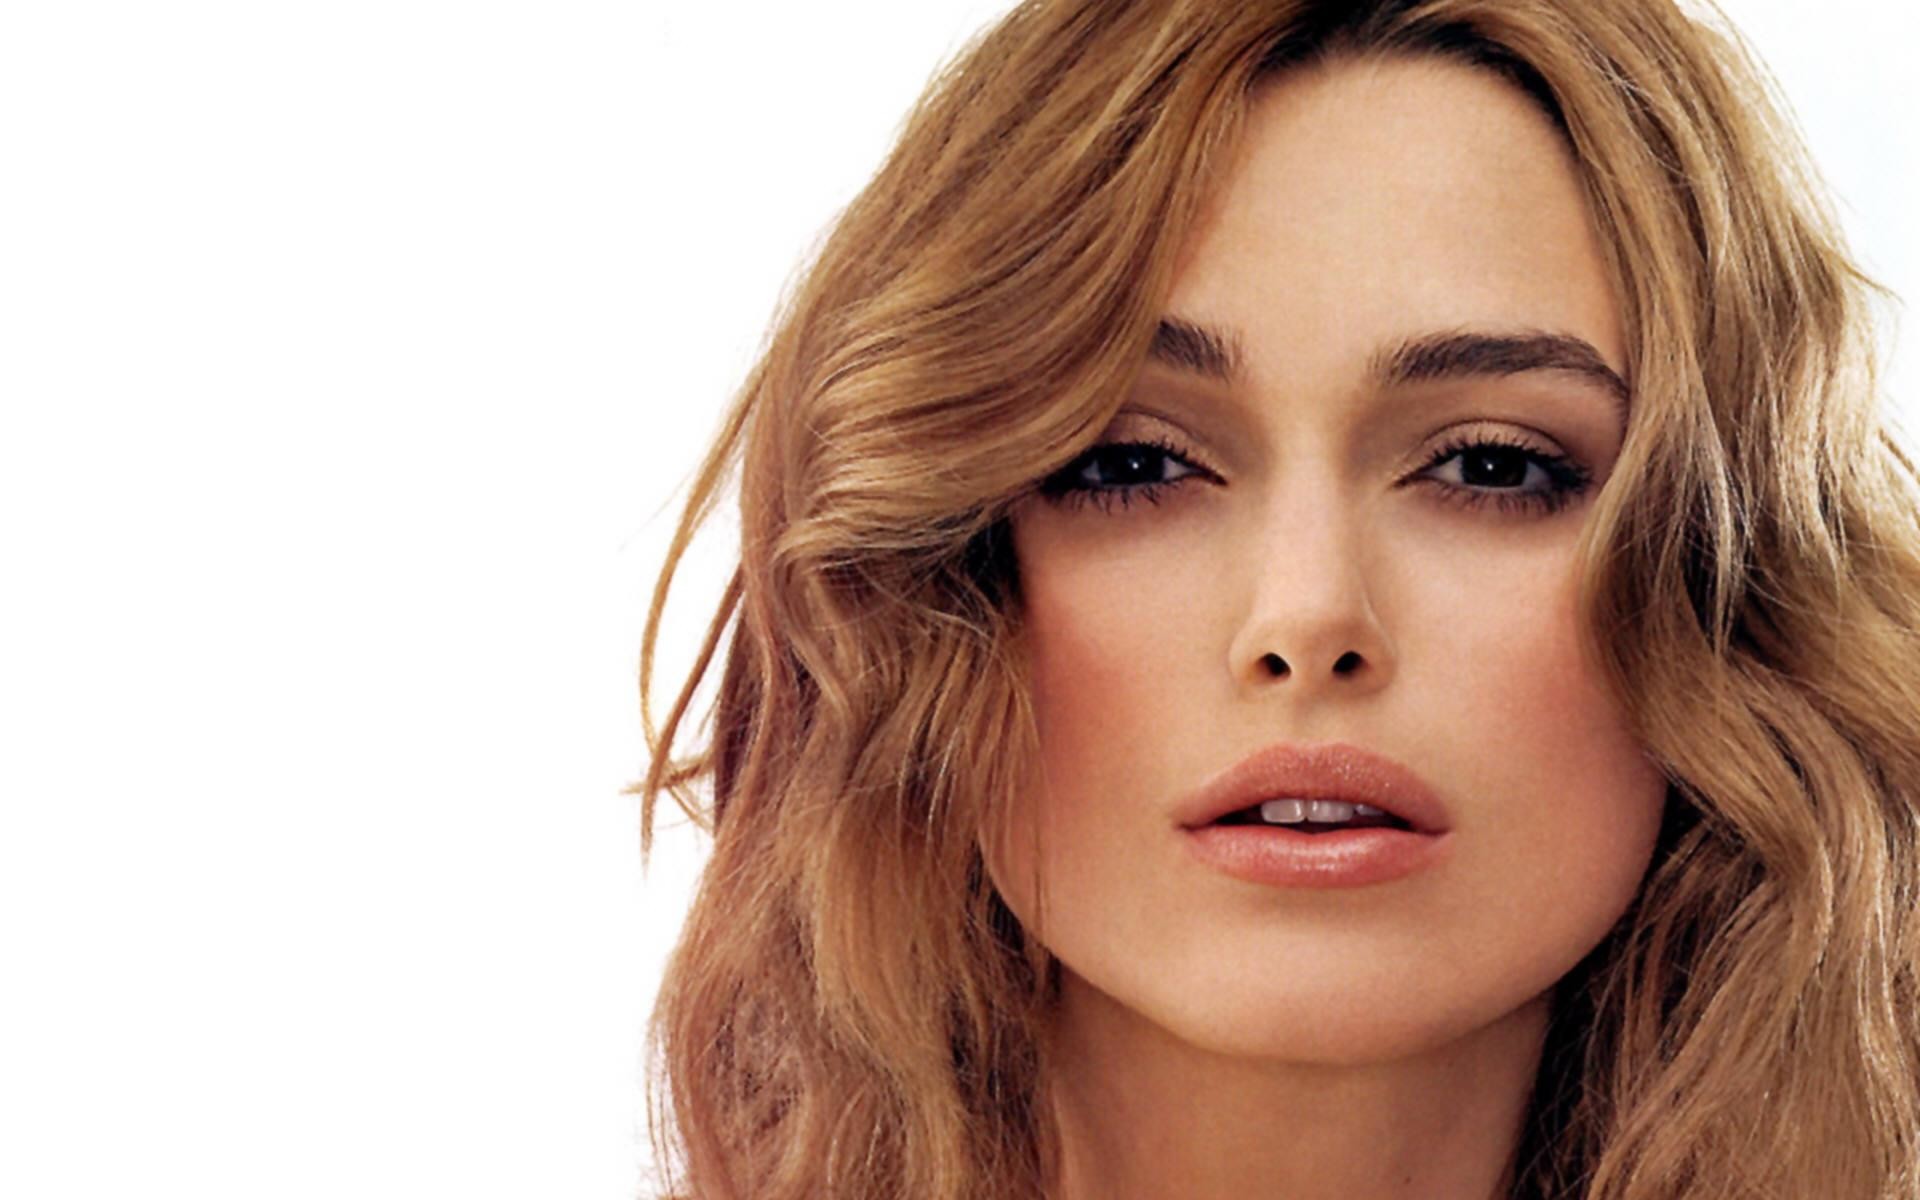 Tags Keira Knightley. Category Celebrities